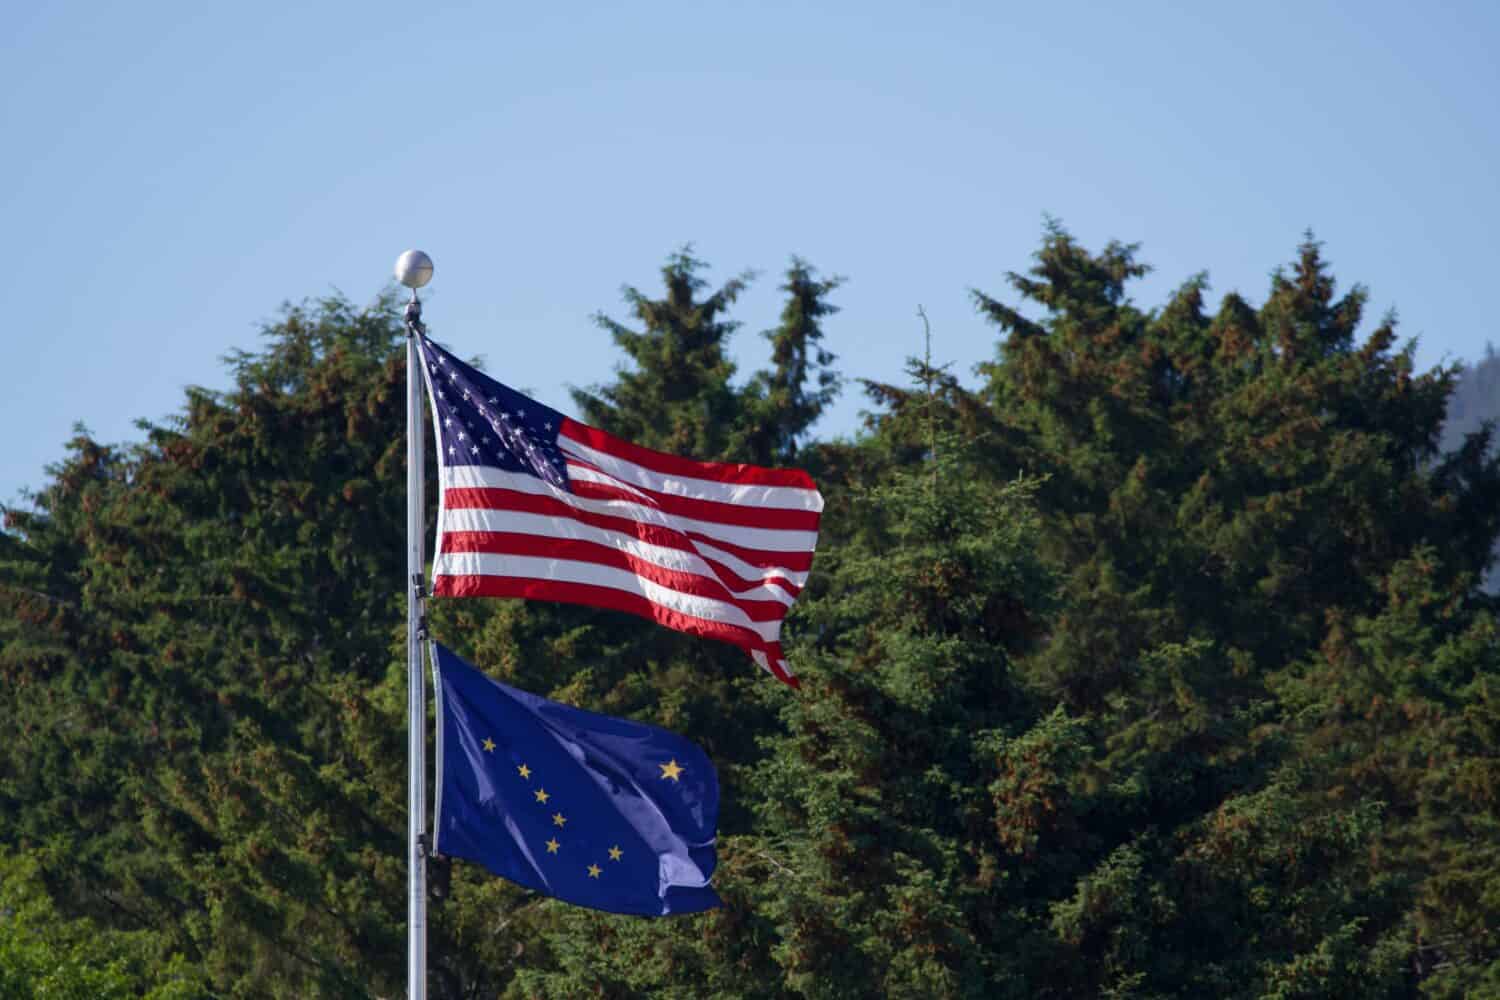 an American flag flies above an Alaska state flag on a sunny day with evergreen trees in the background